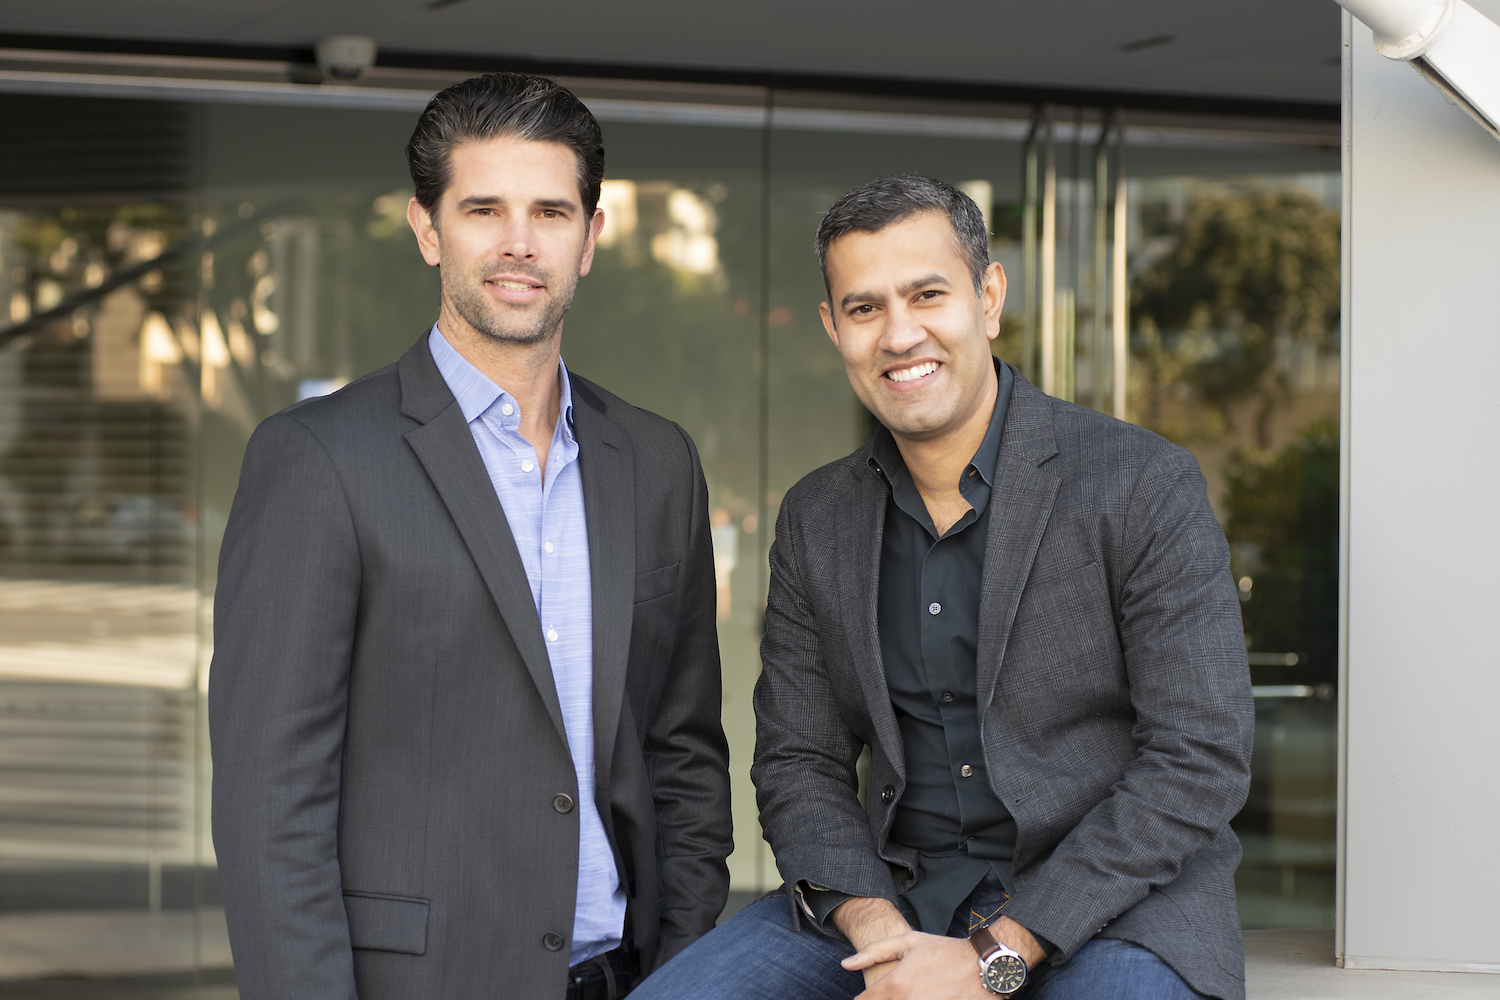 Measured was co-founded by CEO Trevor Testwuide and CTO Madan Bharadwaj